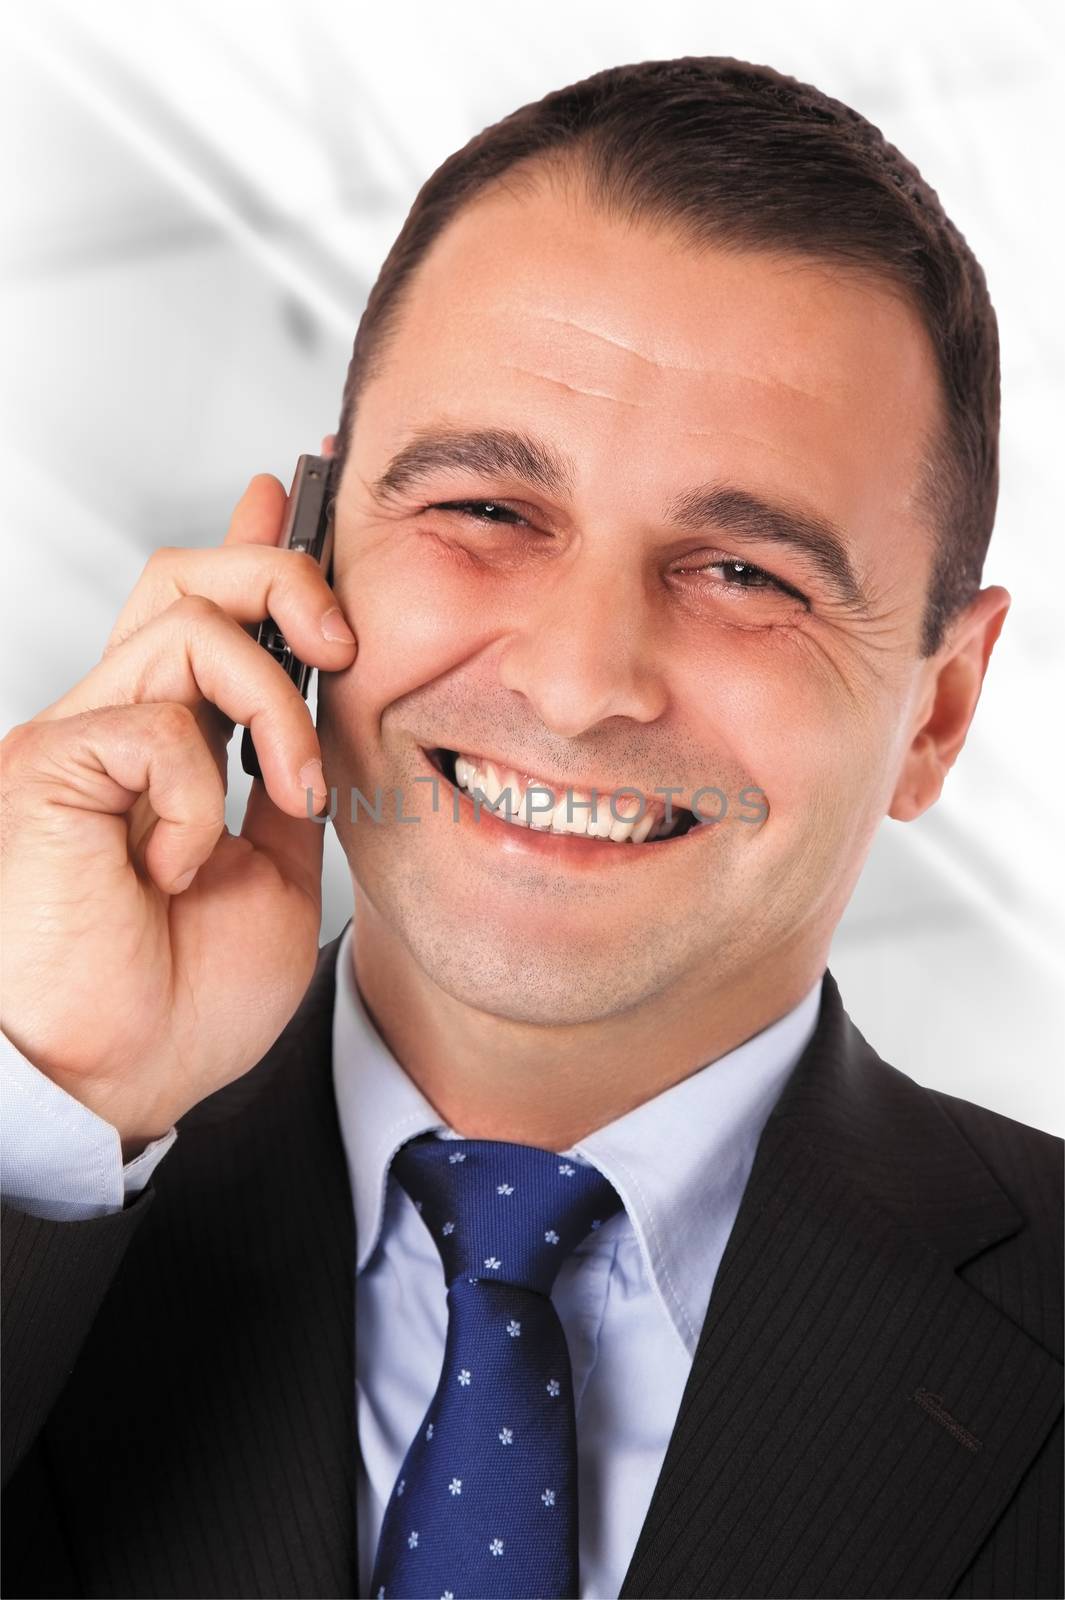 Happy bussinessman with suit speaking on telephone. Isolated Work Path